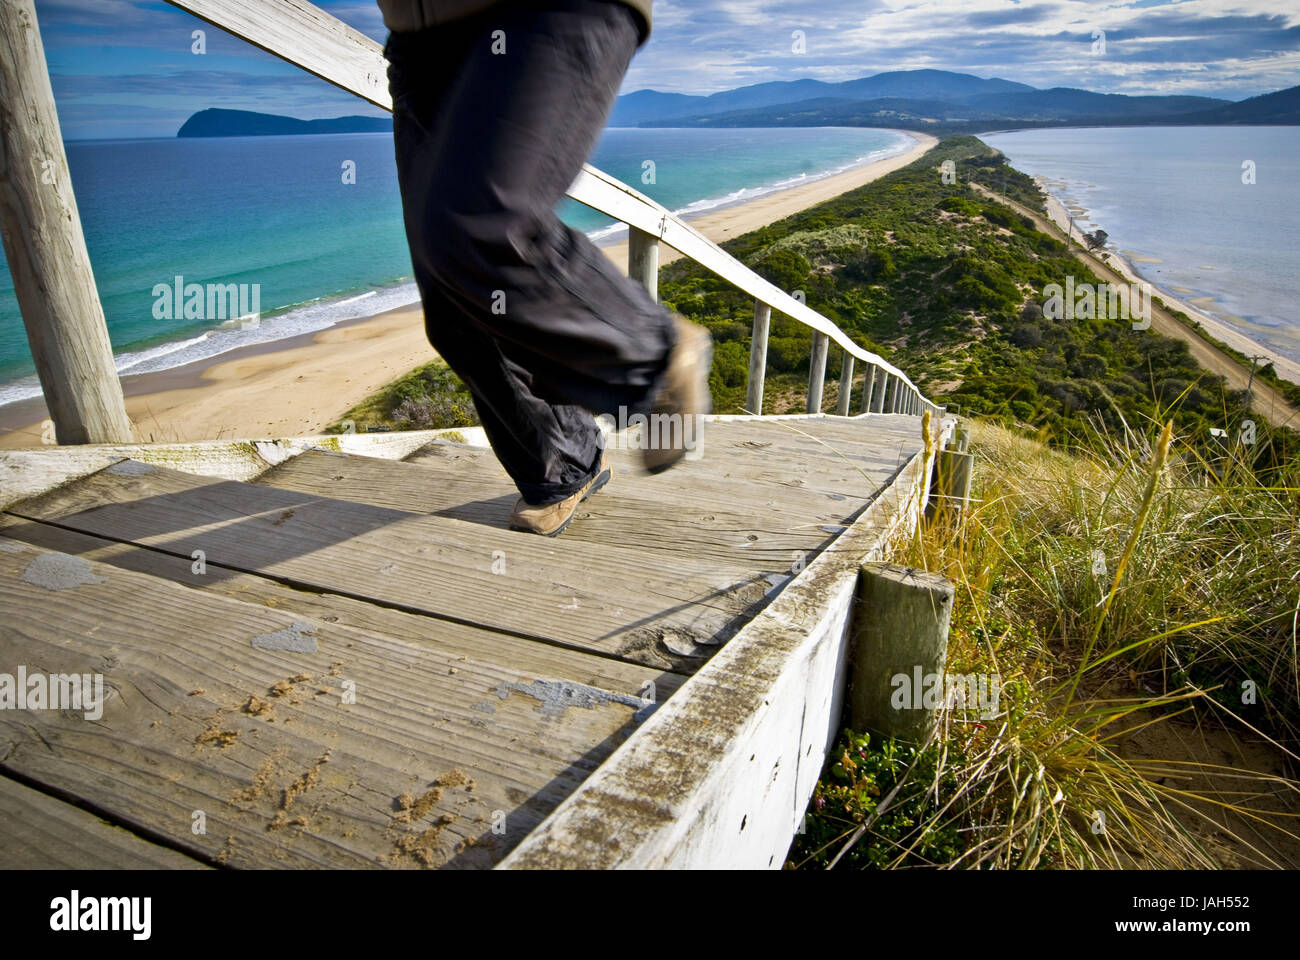 Australia,Tasmania,Bruny Iceland,bay bar,'the tease',North Bruny,South Bruny,stairs,person, Stock Photo